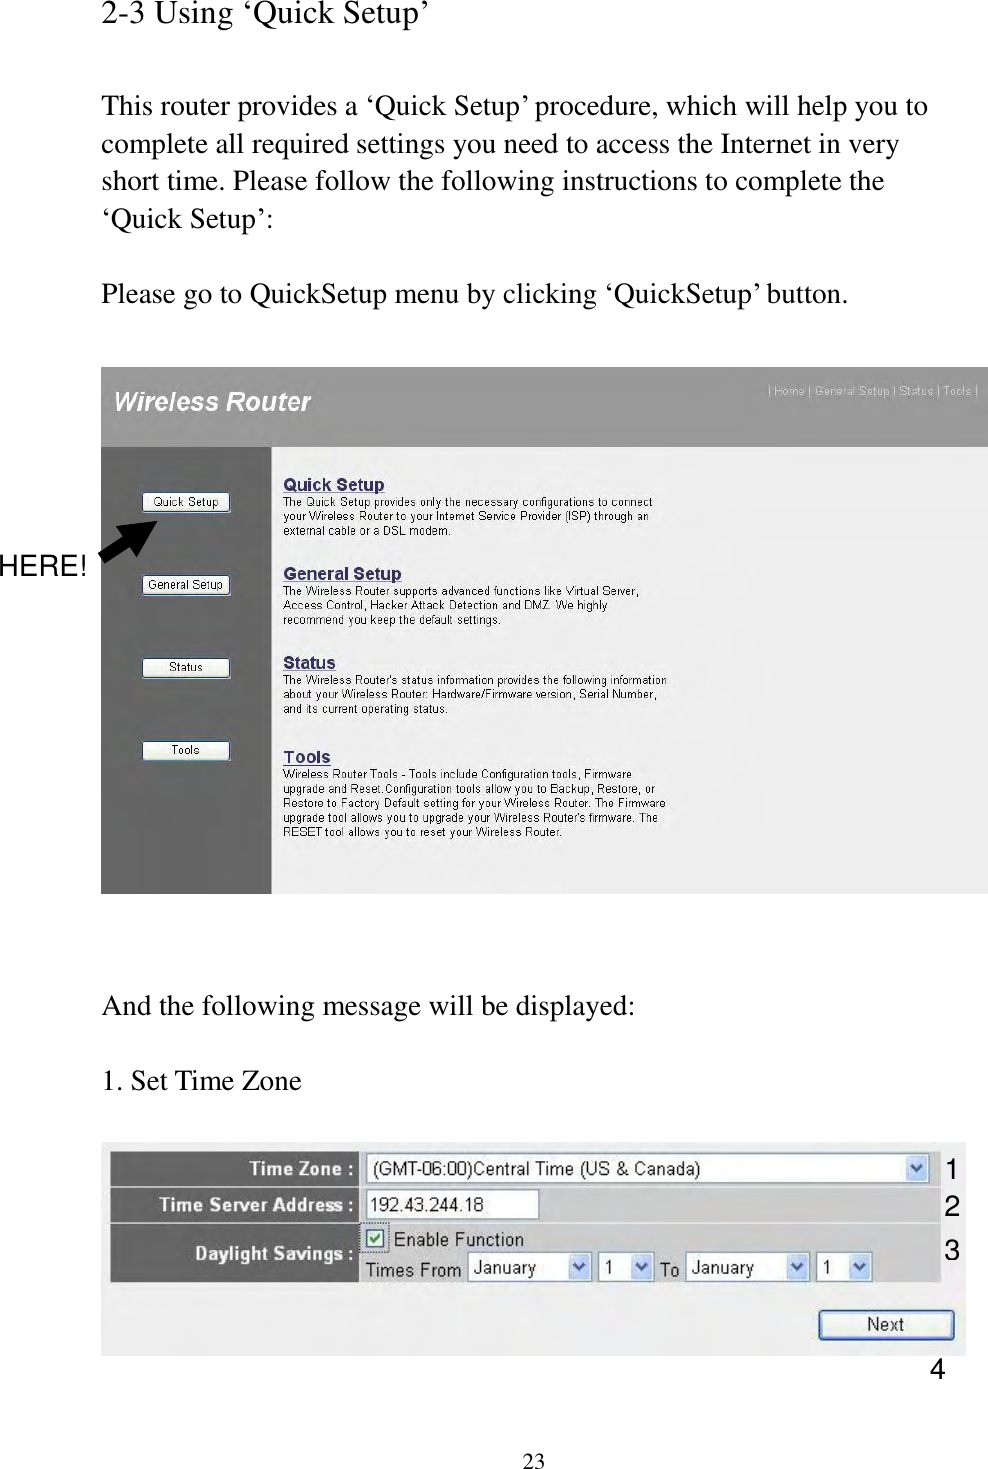 23 2-3 Using „Quick Setup‟  This router provides a „Quick Setup‟ procedure, which will help you to complete all required settings you need to access the Internet in very short time. Please follow the following instructions to complete the „Quick Setup‟:  Please go to QuickSetup menu by clicking „QuickSetup‟ button.     And the following message will be displayed:  1. Set Time Zone   1 2 3 4 HERE! 